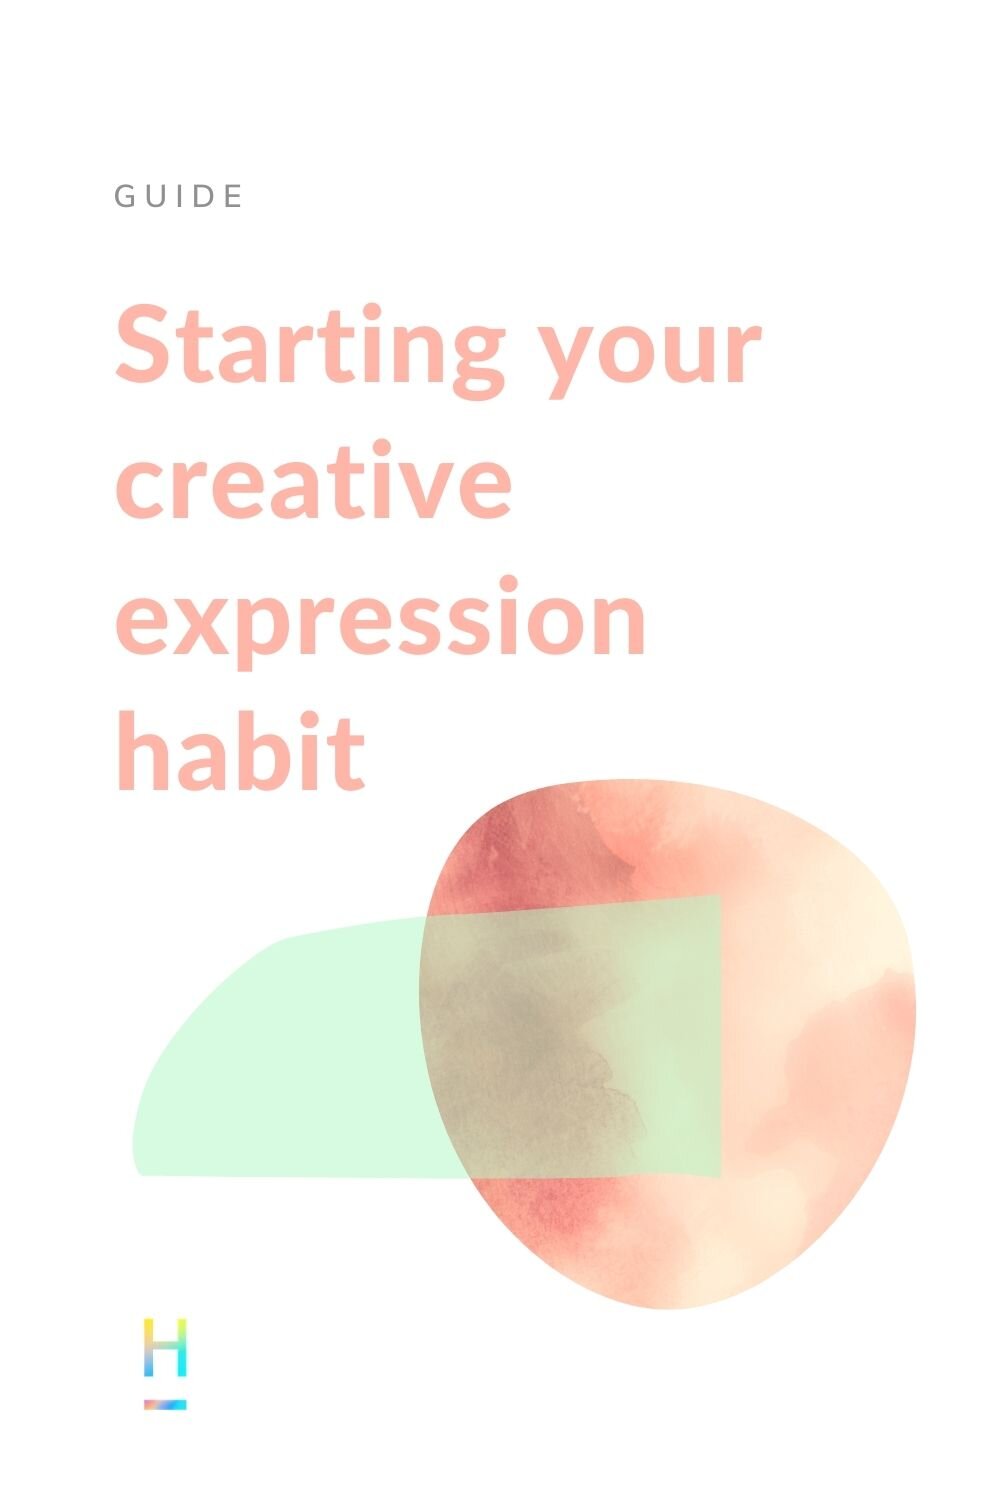 Starting your creative expression habit (Copy) (Copy)